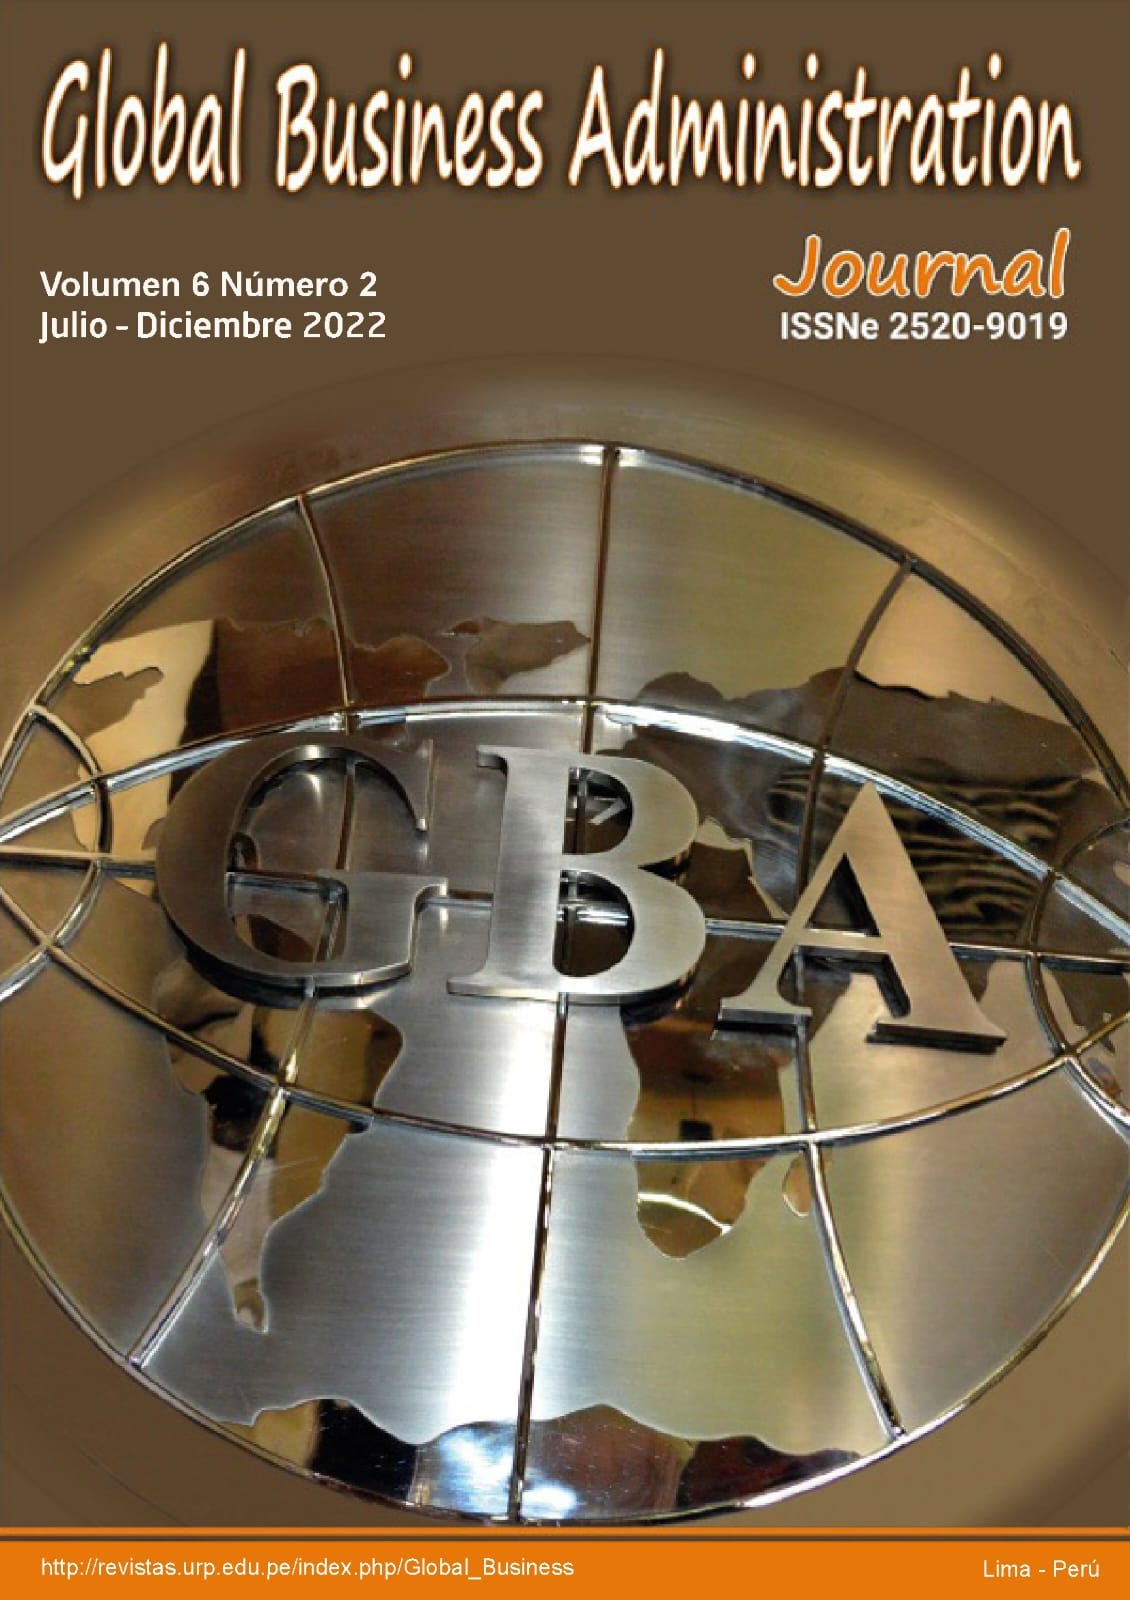 					View Vol. 6 No. 2 (2022): GLOBAL BUSINESS ADMINISTRATION JOURNAL
				